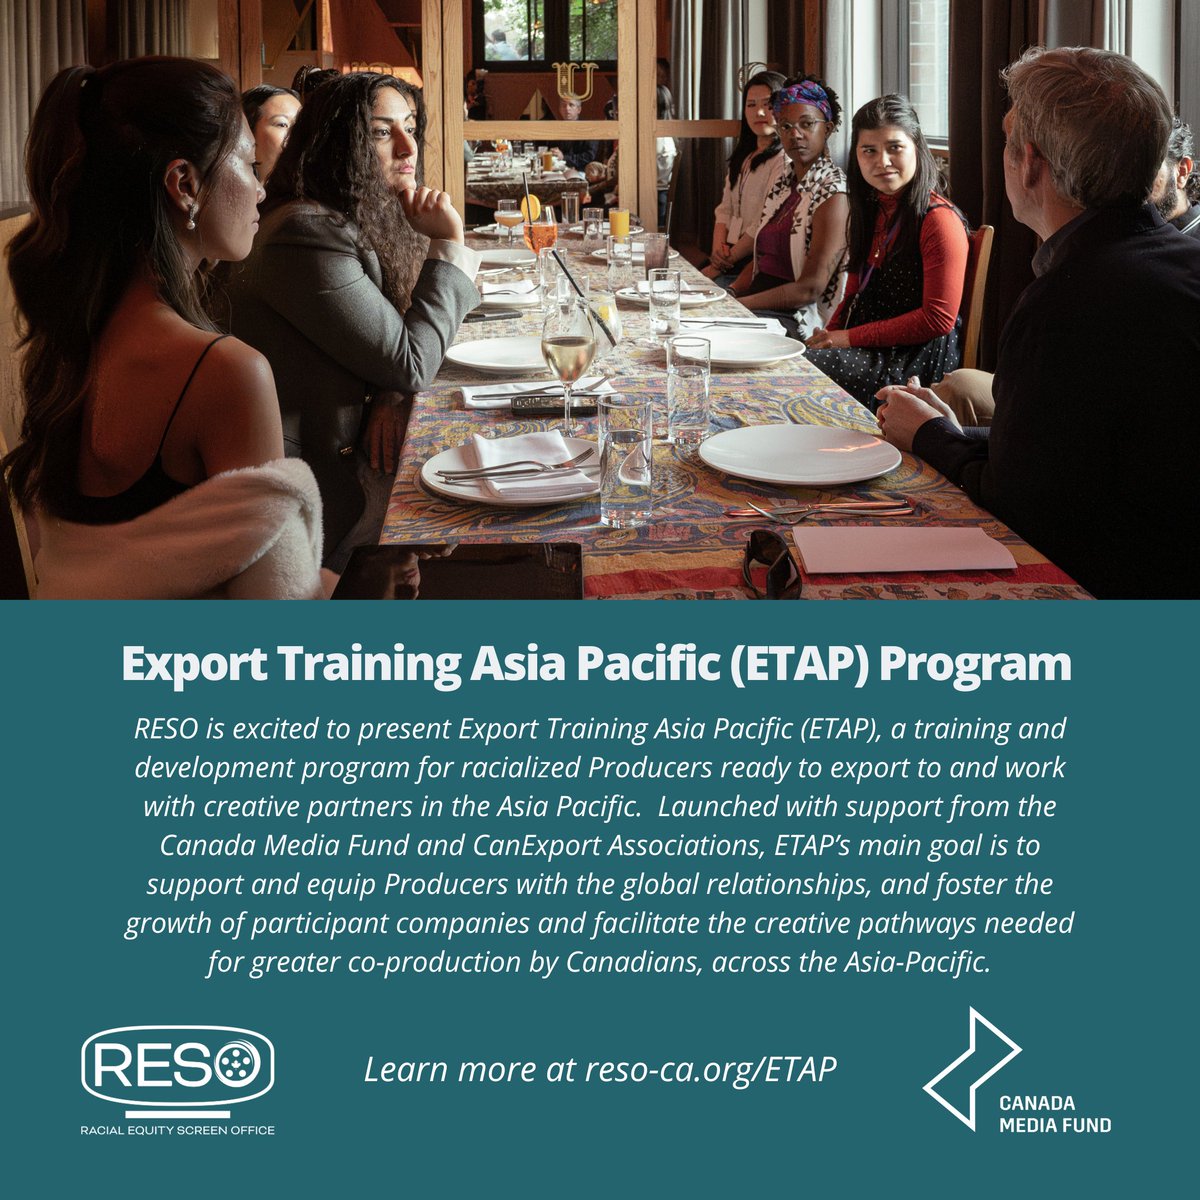 Check out @resoorg's ETAP Program for content creators and producers who wish to increase their knowledge of producing in the Asia Pacific region 📽️ Find out more about the program and how to apply at reso-ca.org/ETAP. #VAFF #communitypartner #reso